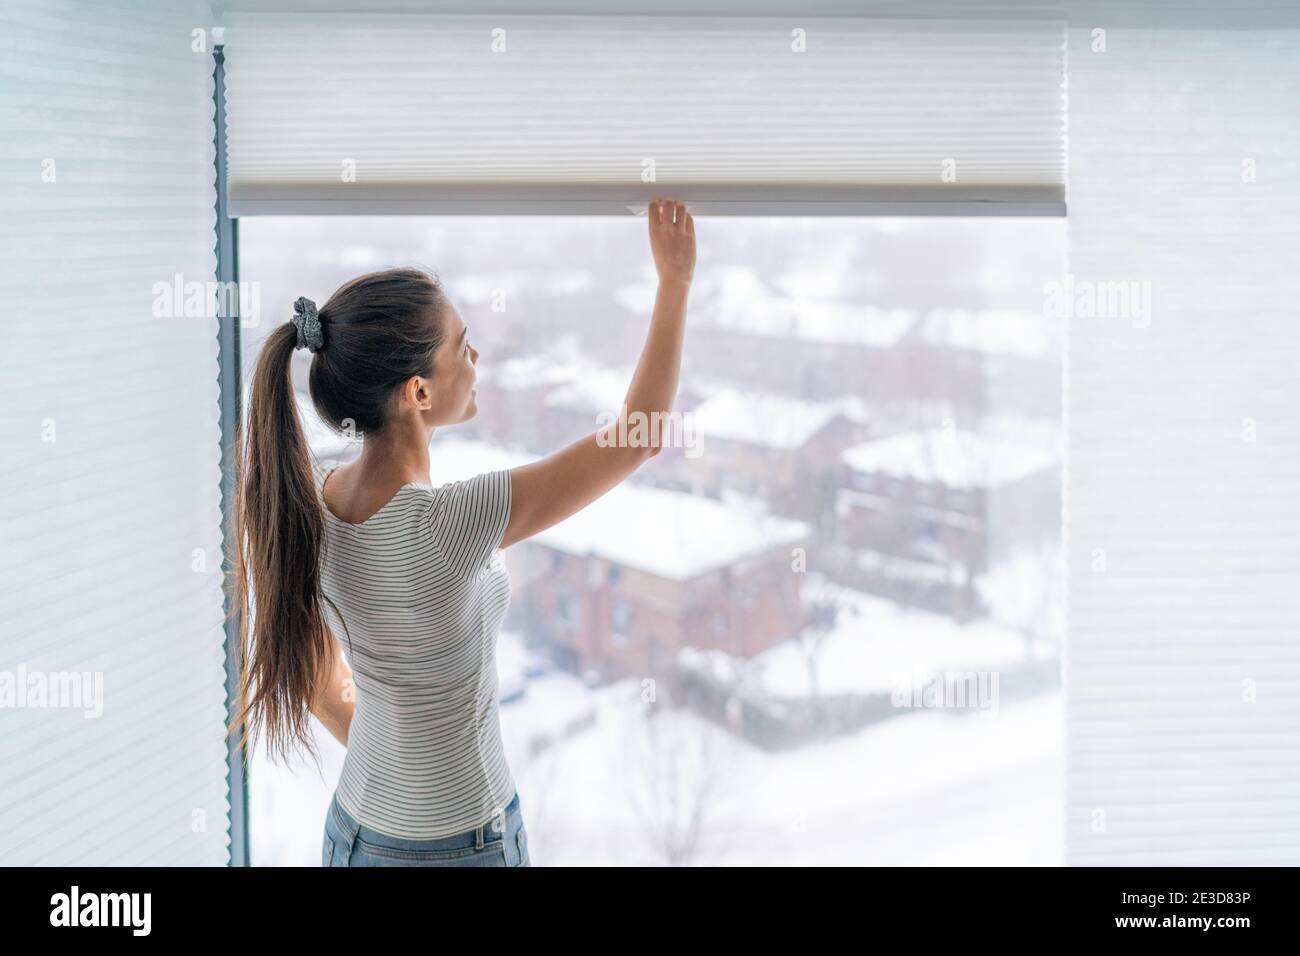 Home blinds window shades woman opening shade blind during winter morning. Asian girl holding modern cordless top down luxury curtains indoors Stock Photo